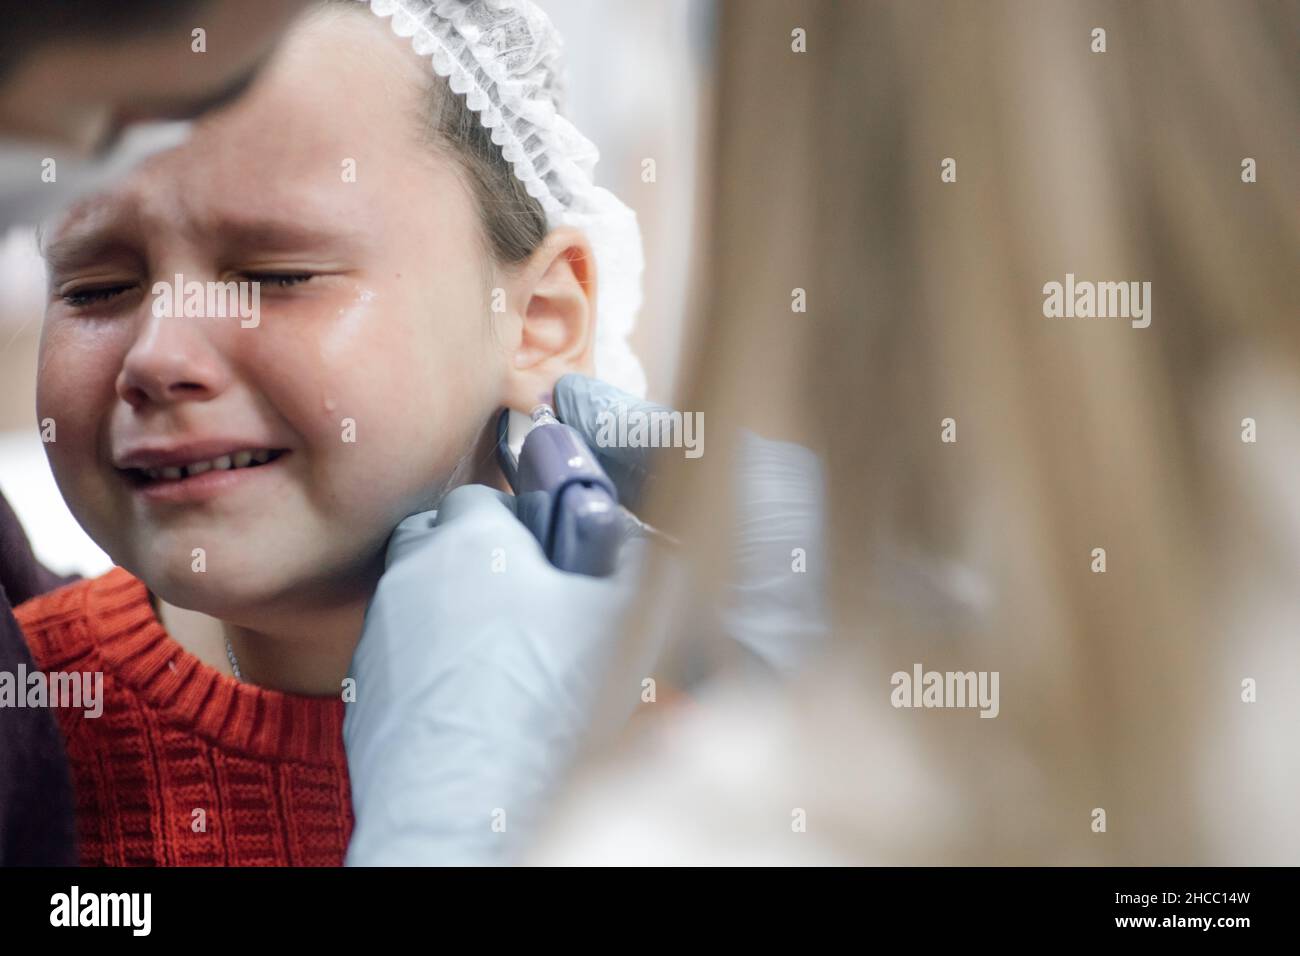 Cosmetologist wearing disposable medical gloves pierce ear with gun for piercing ears of child. Little girl crying in pain. Father support and calm Stock Photo